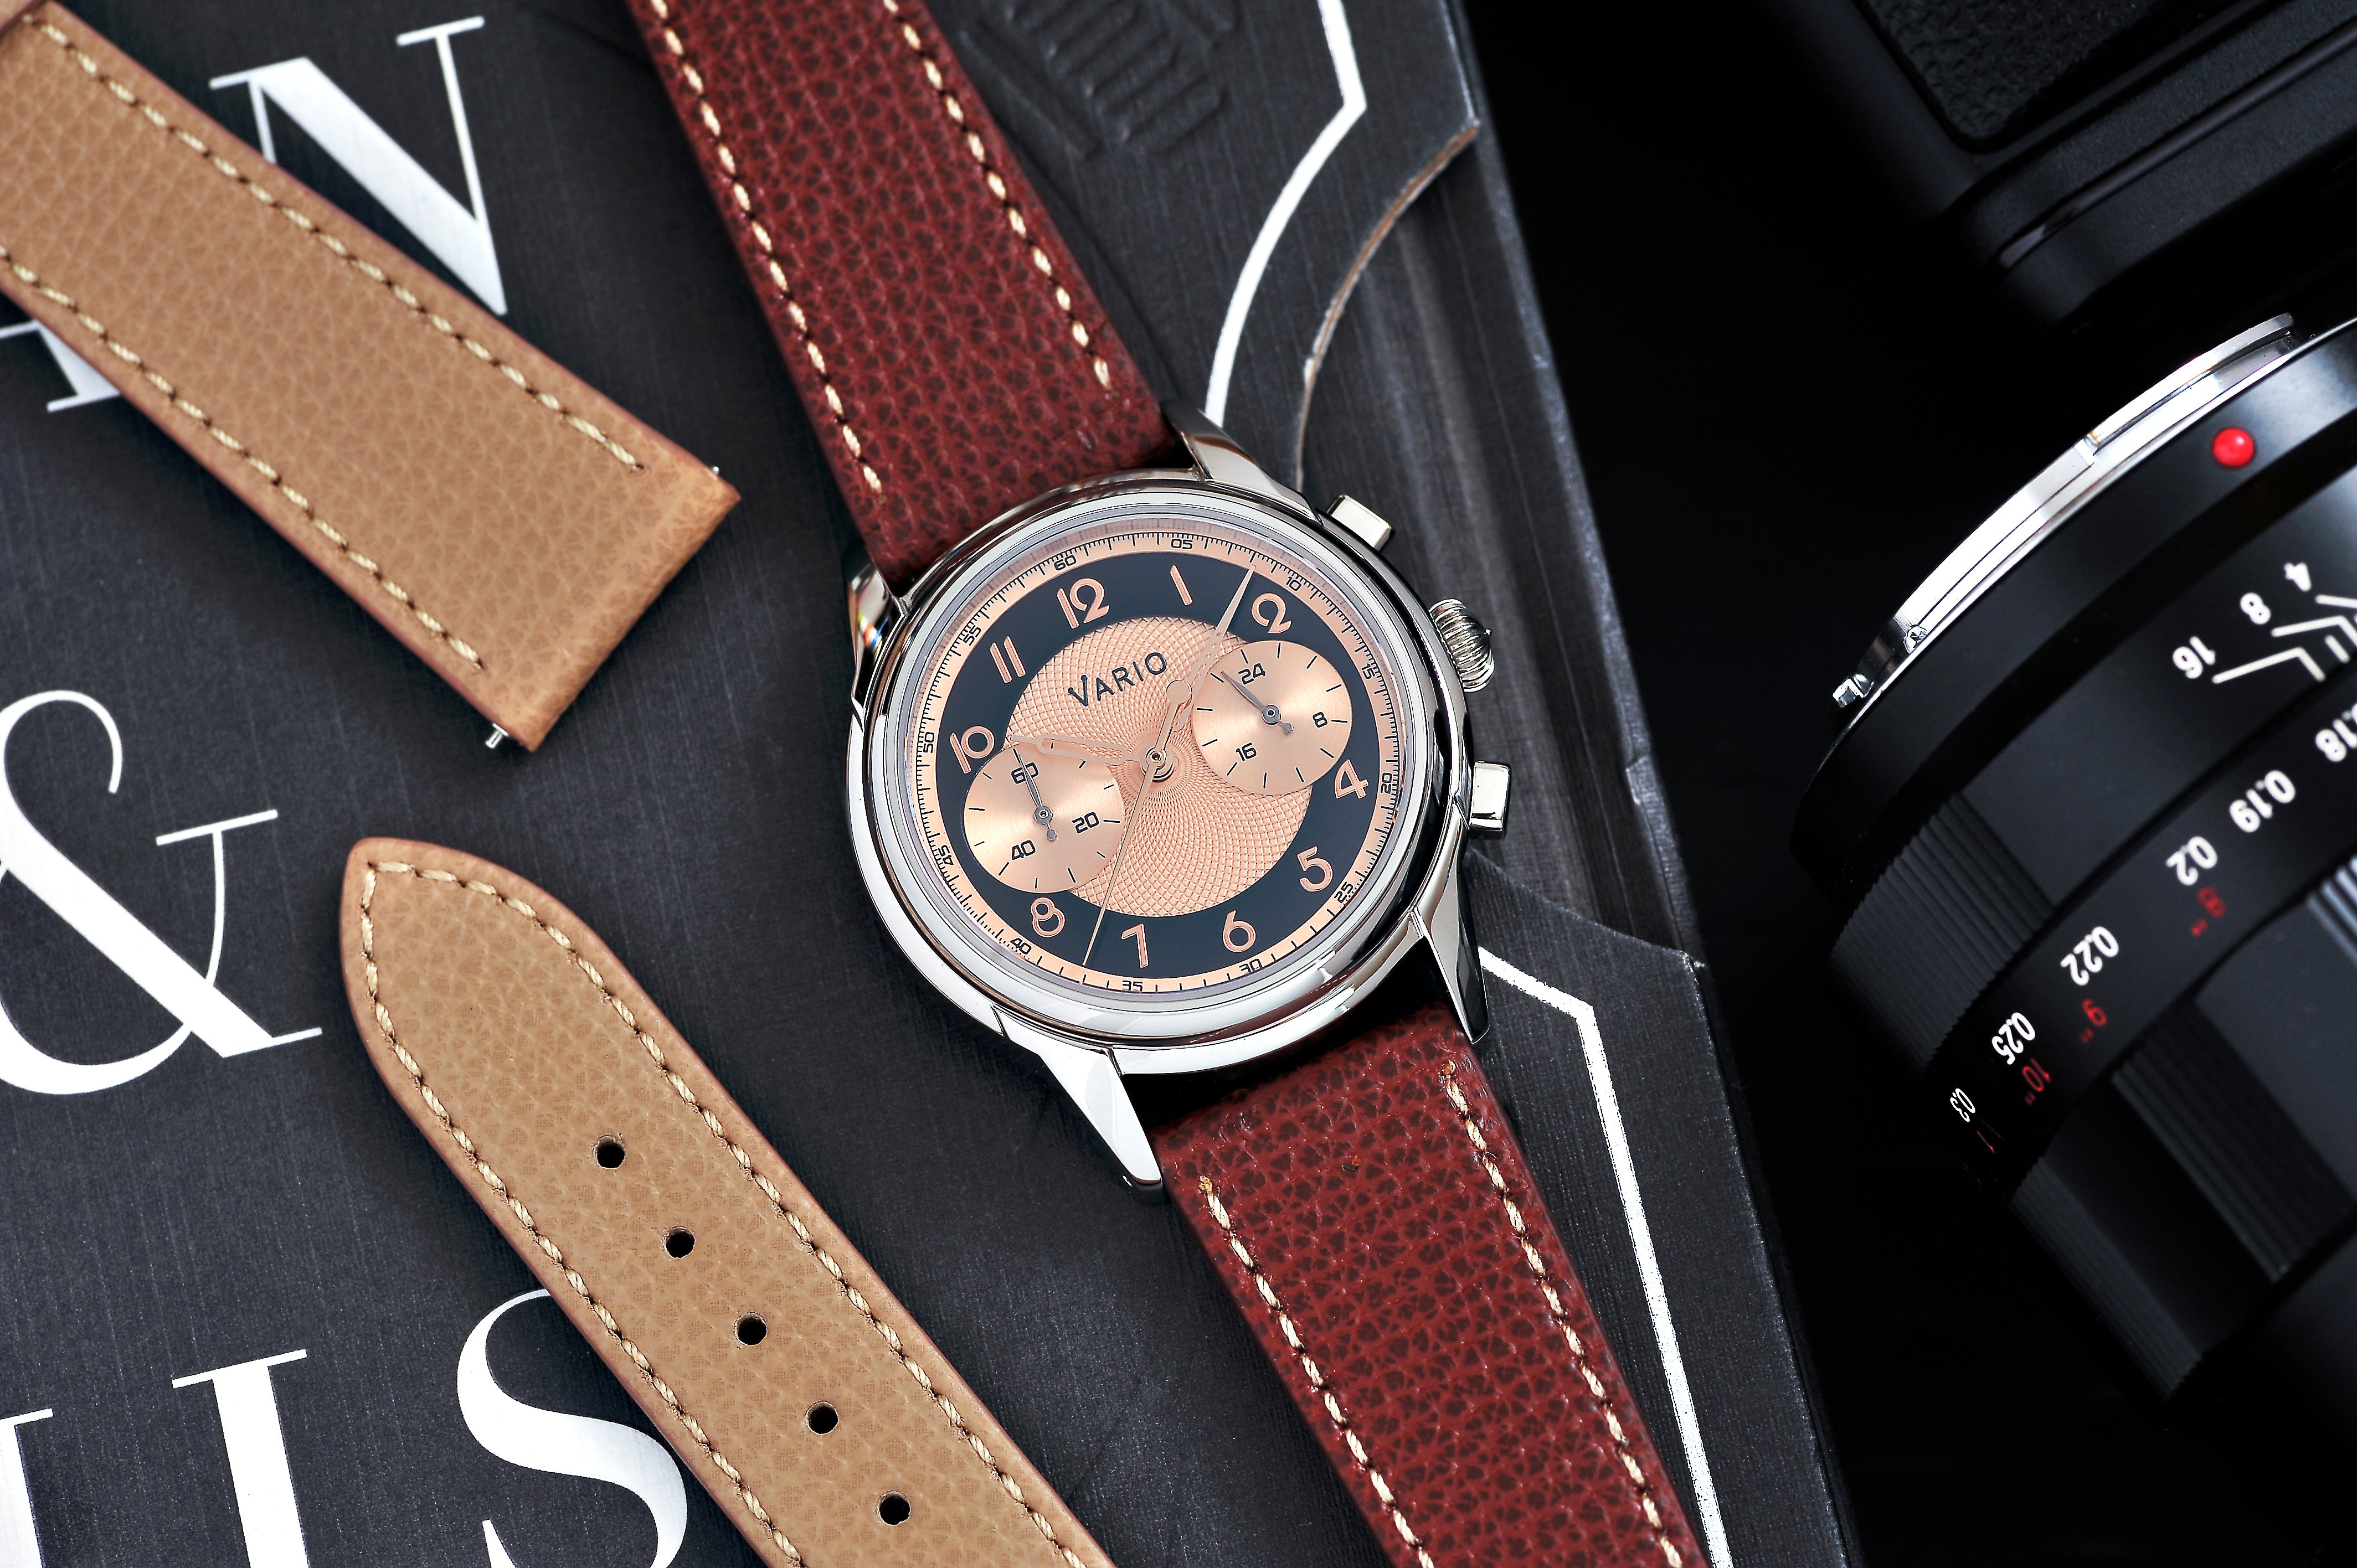 Inspired by sleek geometry, elegant typography and bold designs of the 1930s, Vario’s Empire Art Deco Dress Watch Collection is merging time with timelessness.  The 38mm Empire Art Deco Watch (Handwound) features all custom made parts, a Miyota 6T33 handwound movement with clean sweep hands, sapphire crystal and a luxurious Italian leather watch strap. 